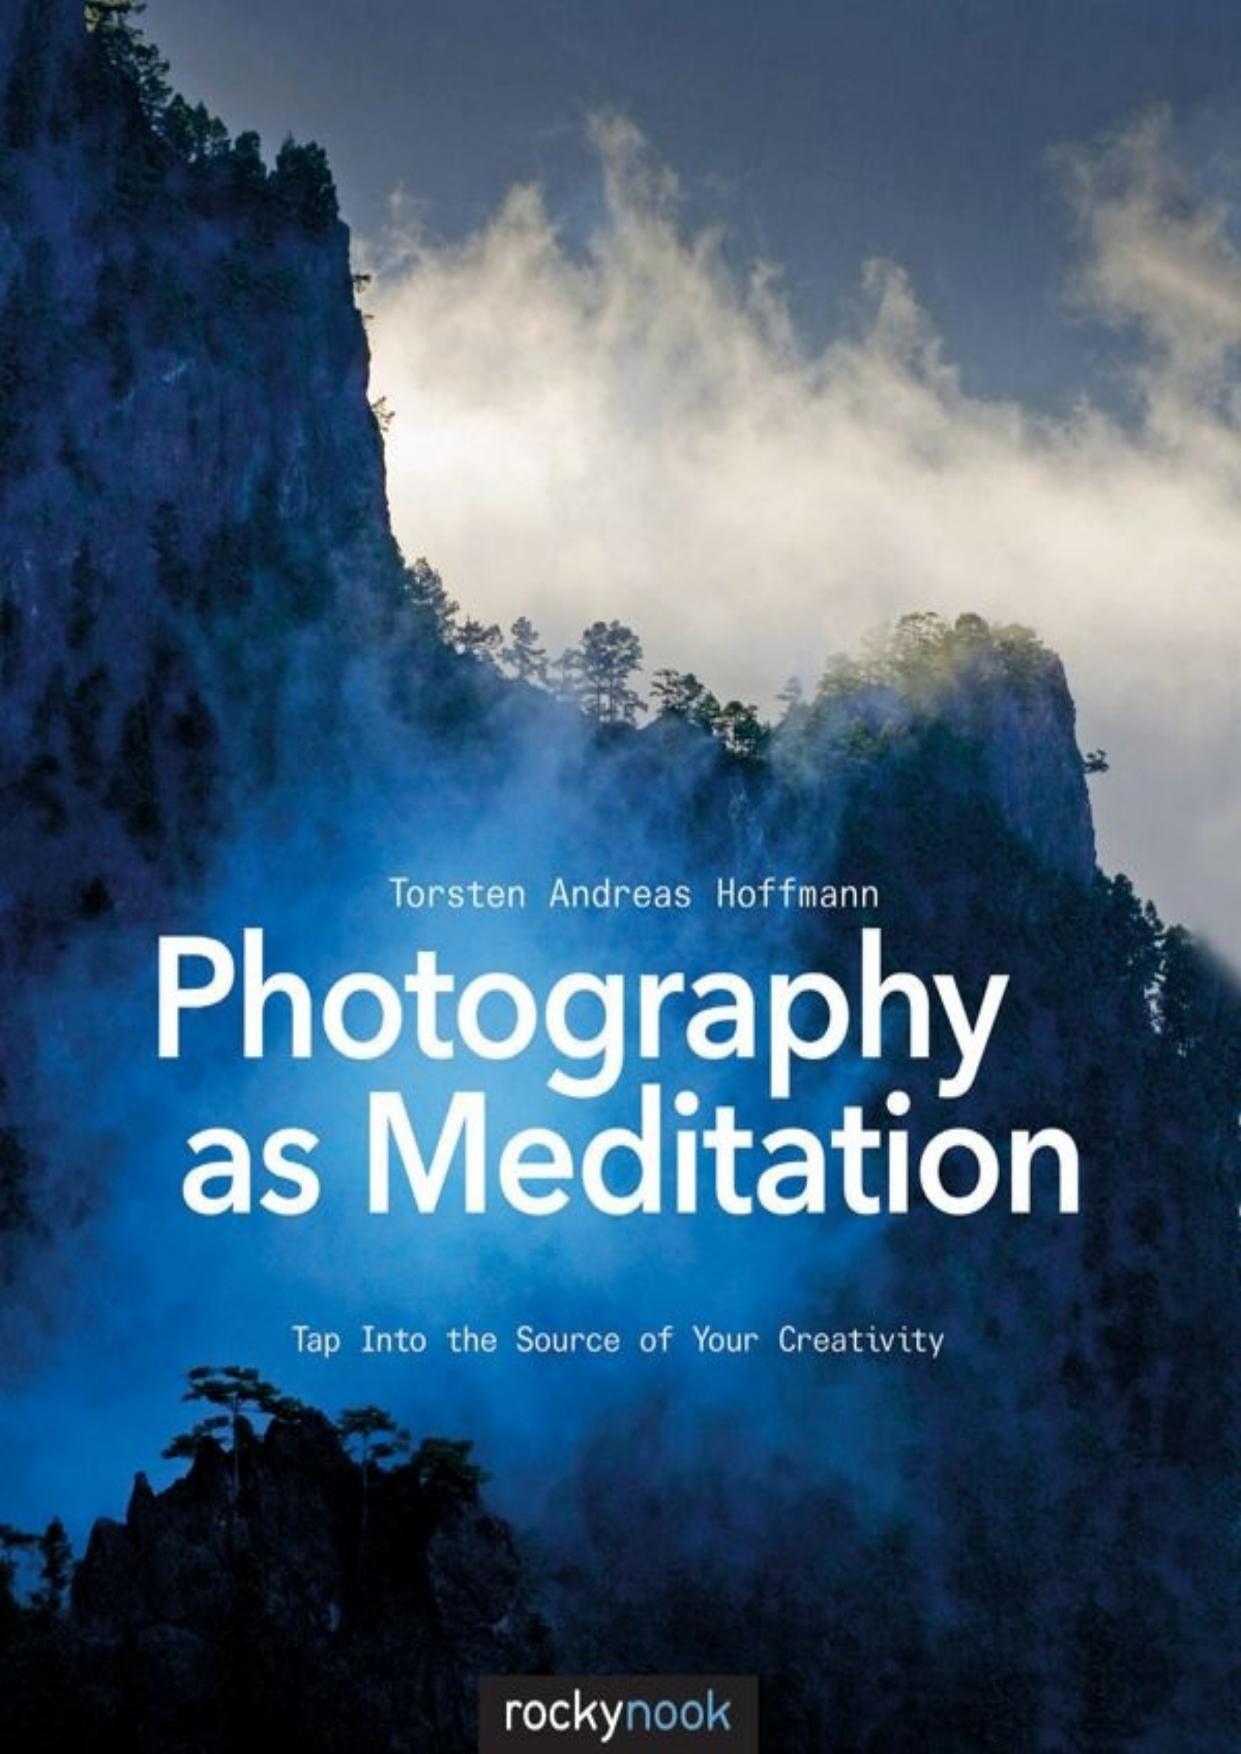 Photography as Meditation: Tap Into the Source of Your Creativity by Torsten Andreas Hoffmann